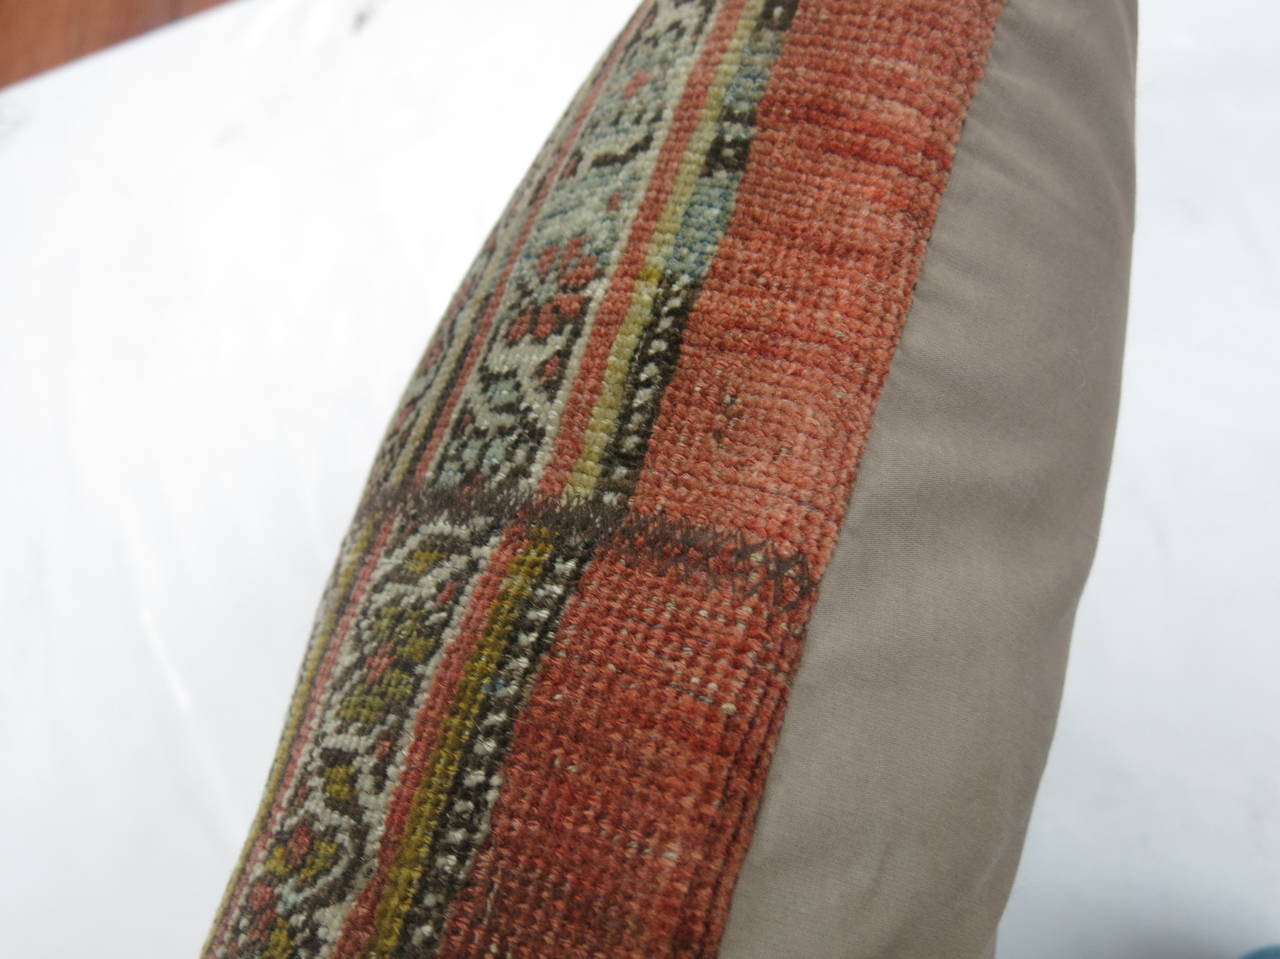 Pillow made from an antique Persian Bidjar rug with a zipper closure included.